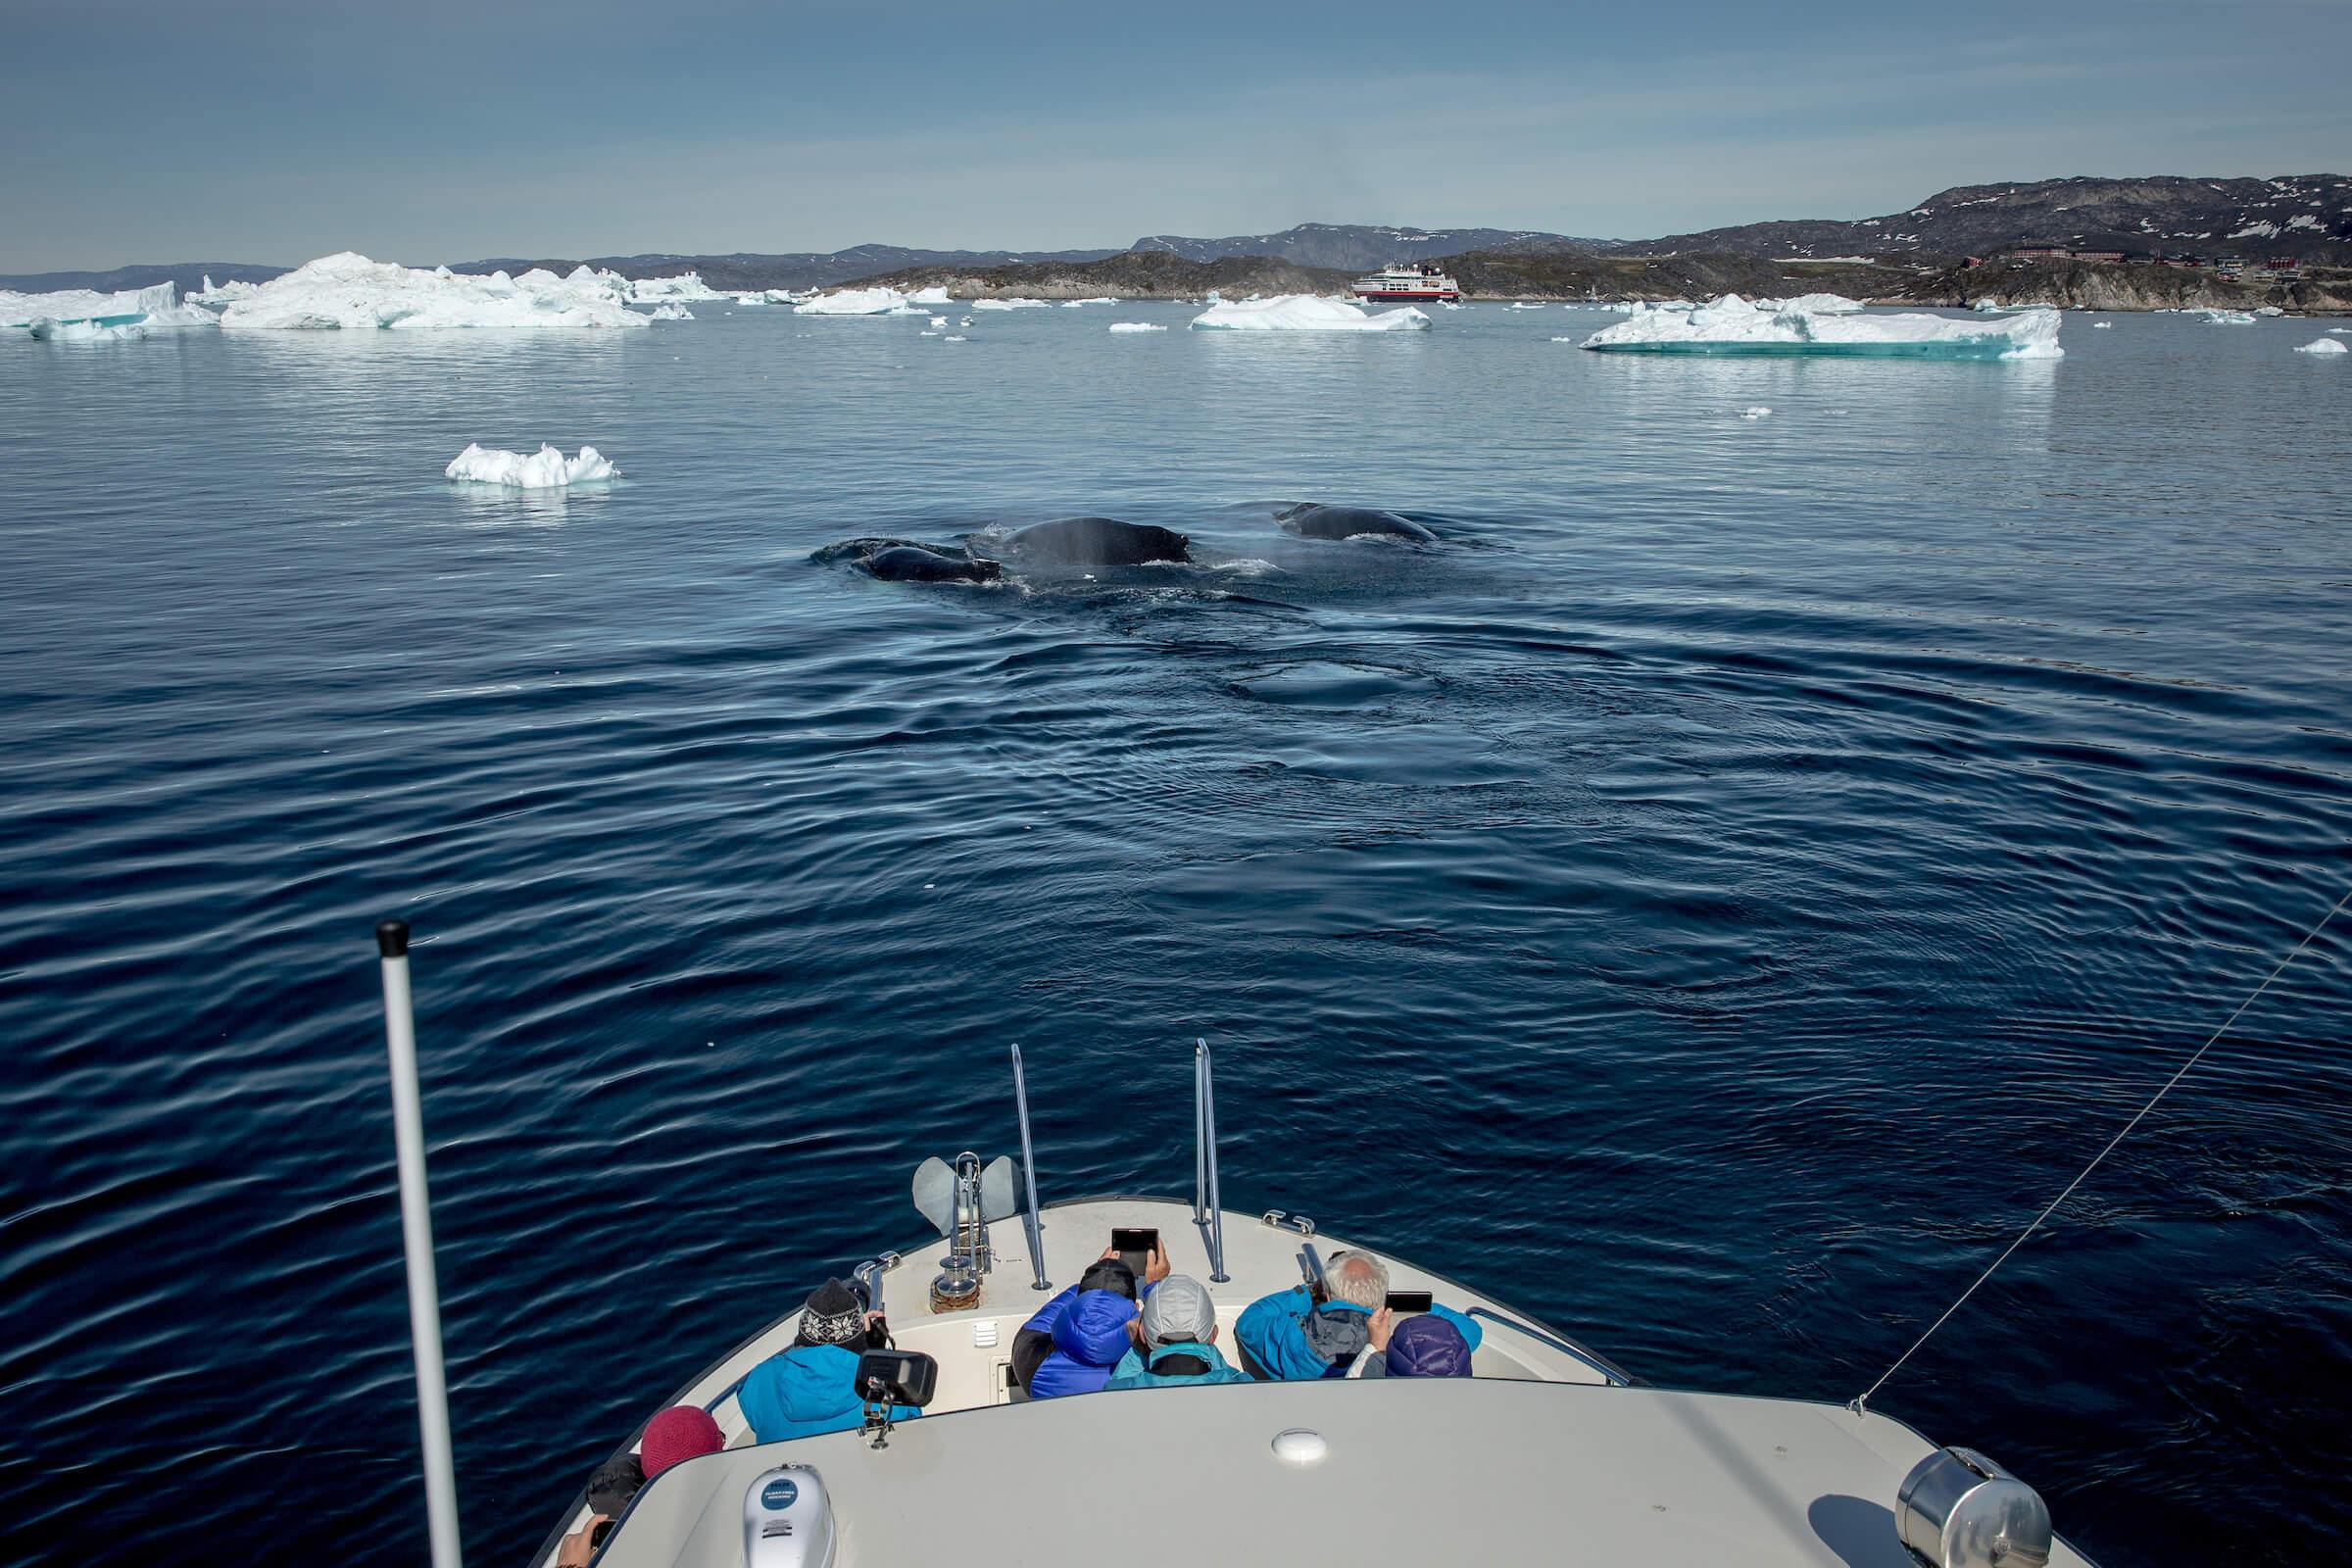 A whale safari near Ilulissat in Greenland. Photo by Mads Pihl - Visit Greenland